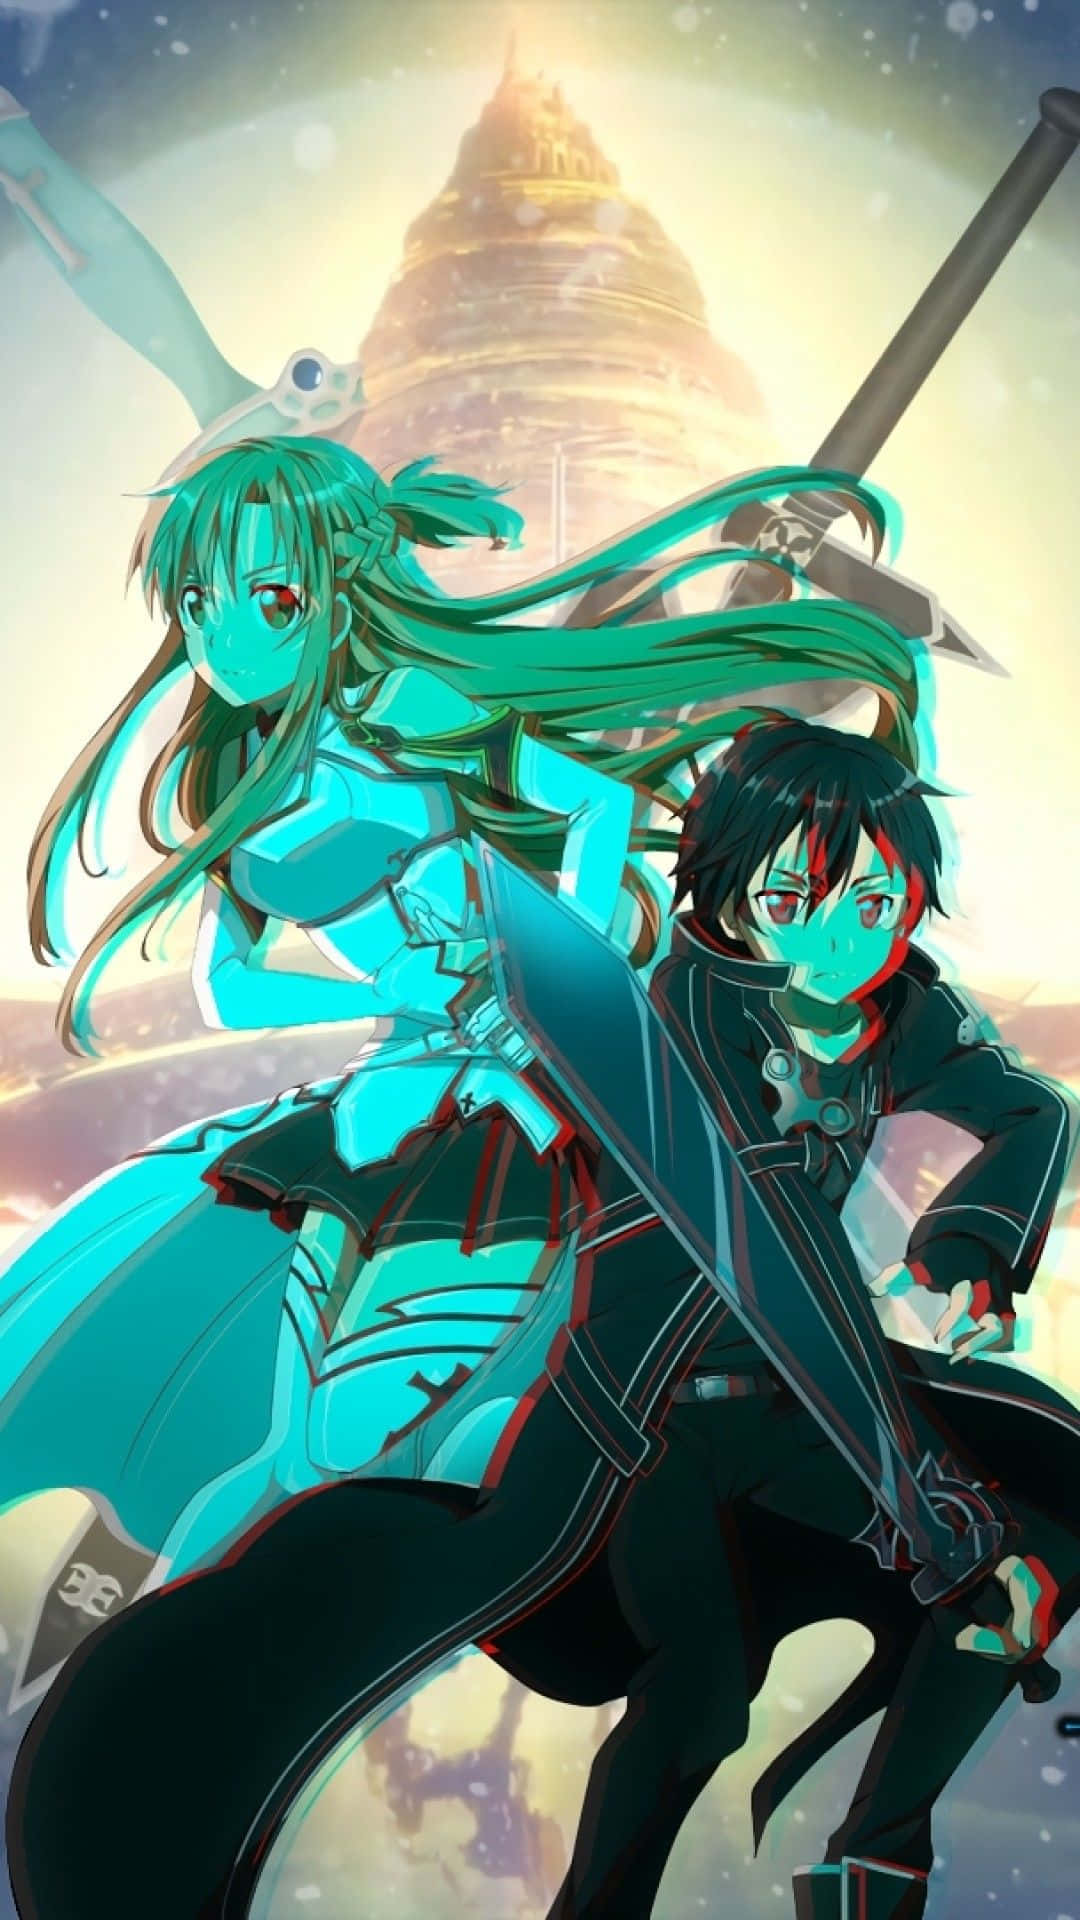 Step into the world of Sword Art Online with our SAO Iphone Wallpaper